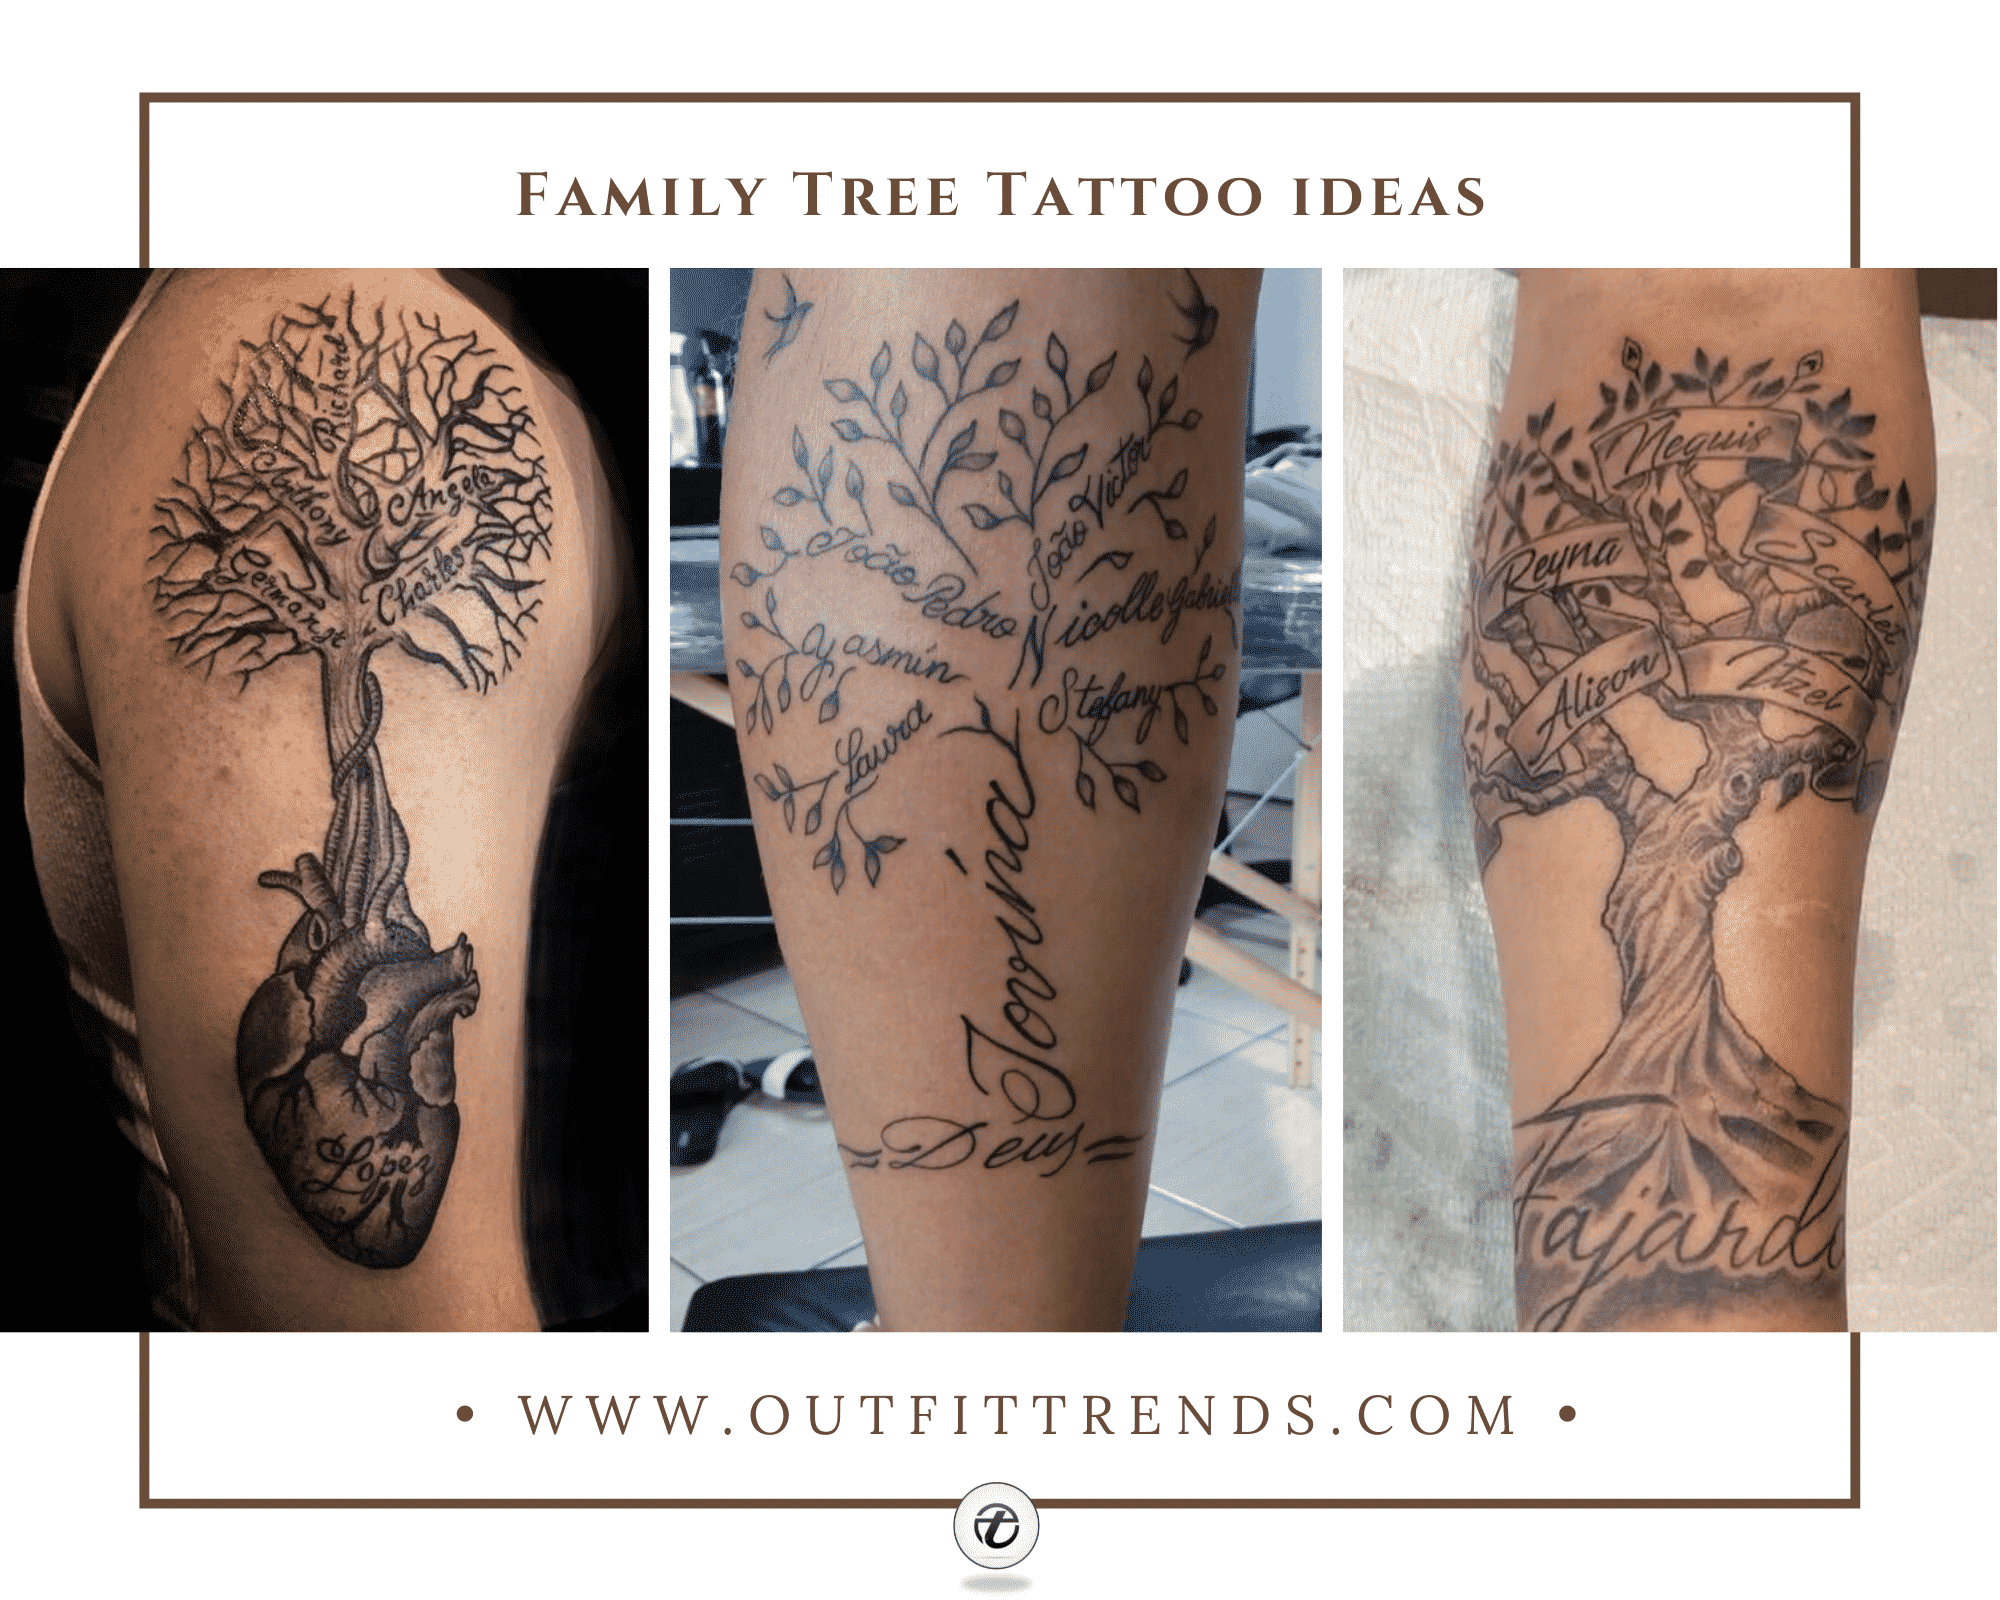 Hand poked forest tattoo on the left forearm